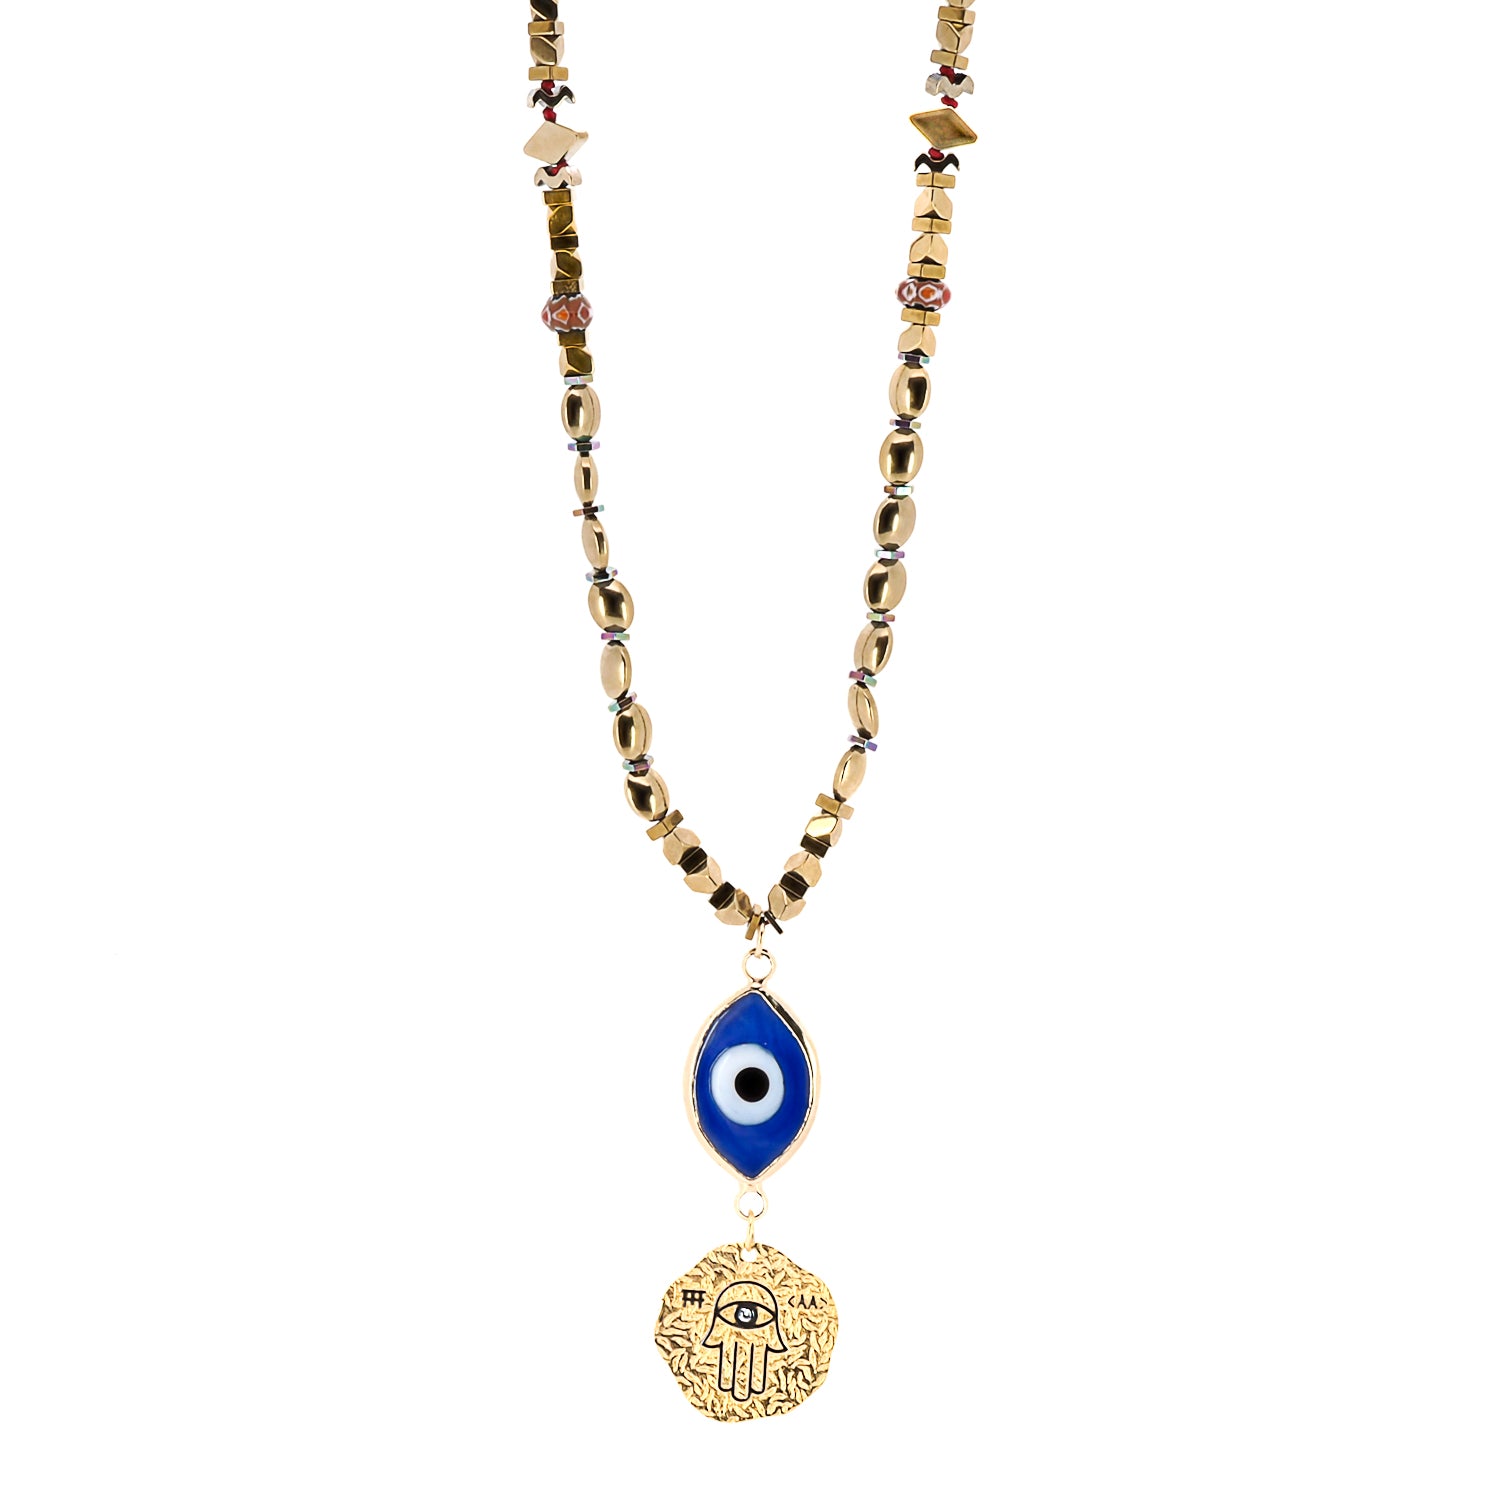 Gold Luck Evil Eye and Hamsa Necklace - A captivating image showcasing the intricate design of the Good Luck Evil Eye and Hamsa Necklace, with gold-colored hematite stone beads, blue crystal beads, and a sterling silver Hamsa pendant plated with 18k gold.